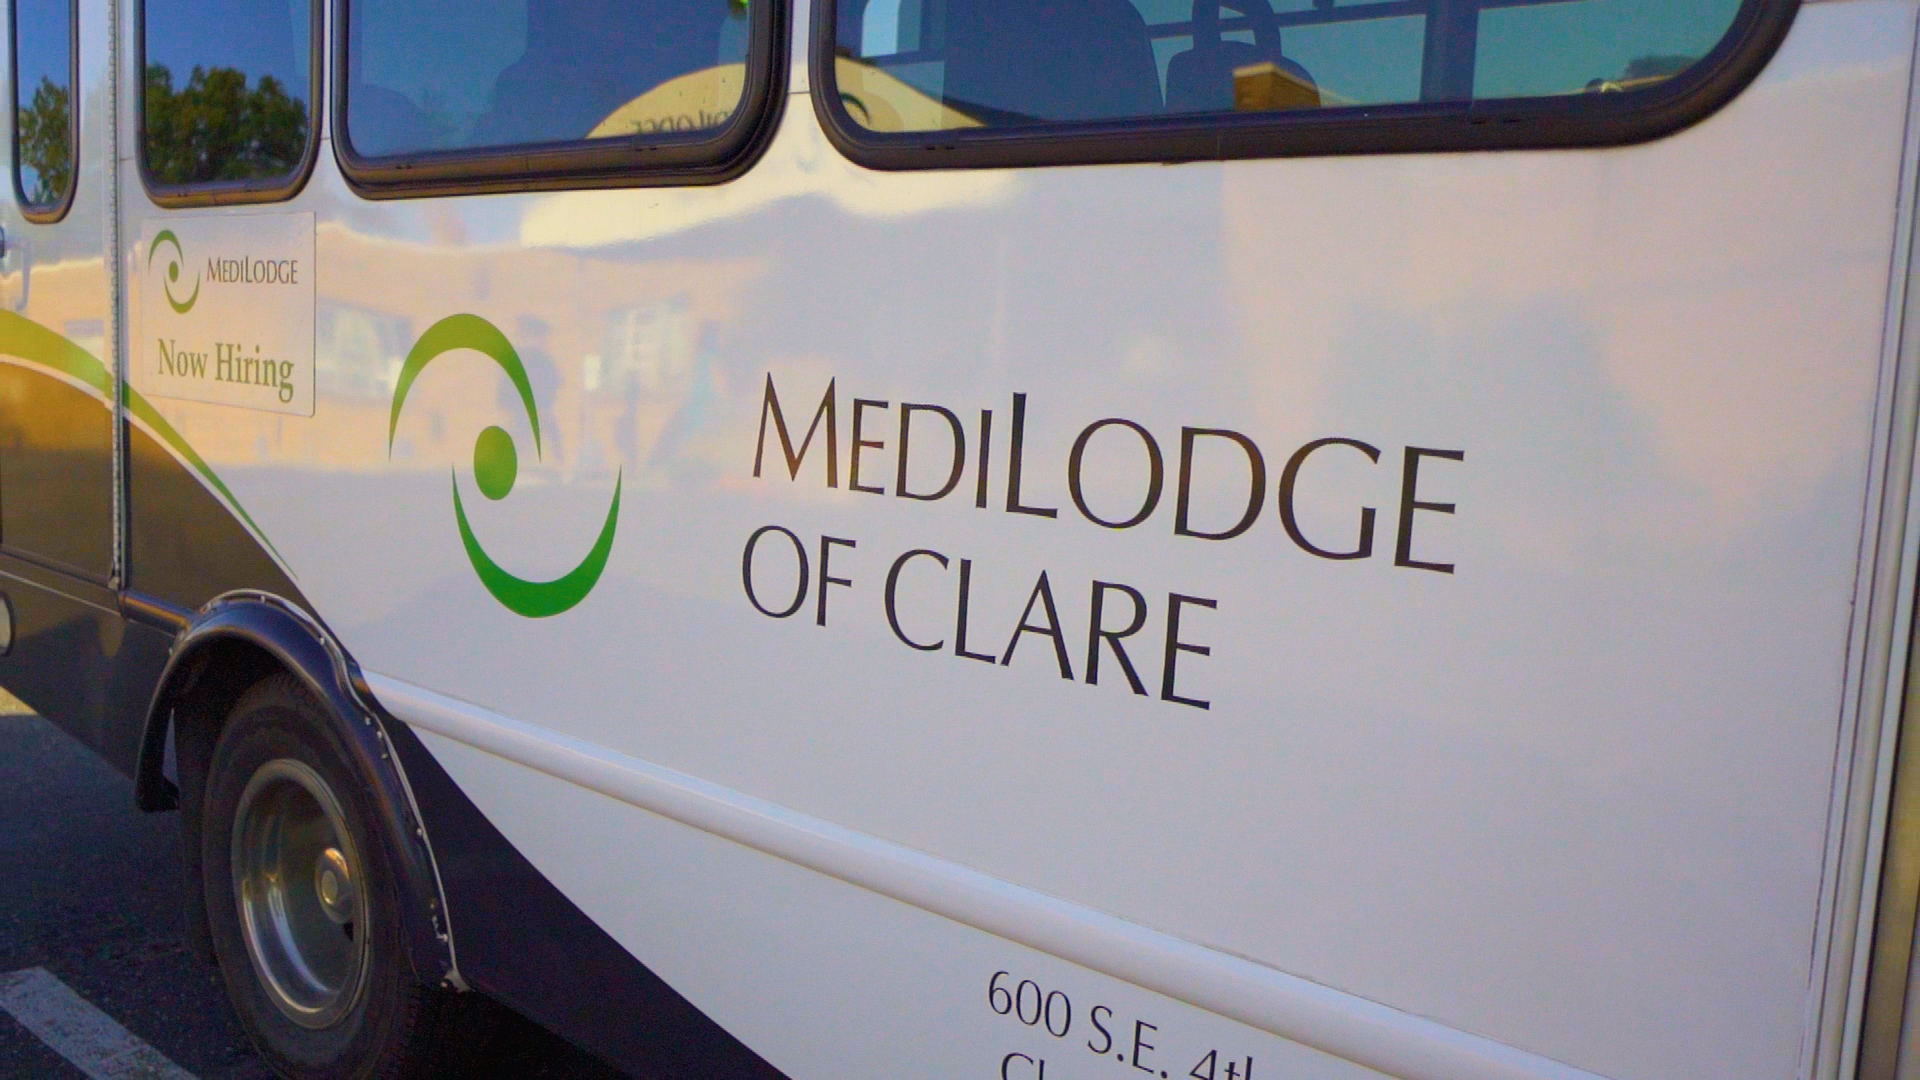 MediLodge of Clare